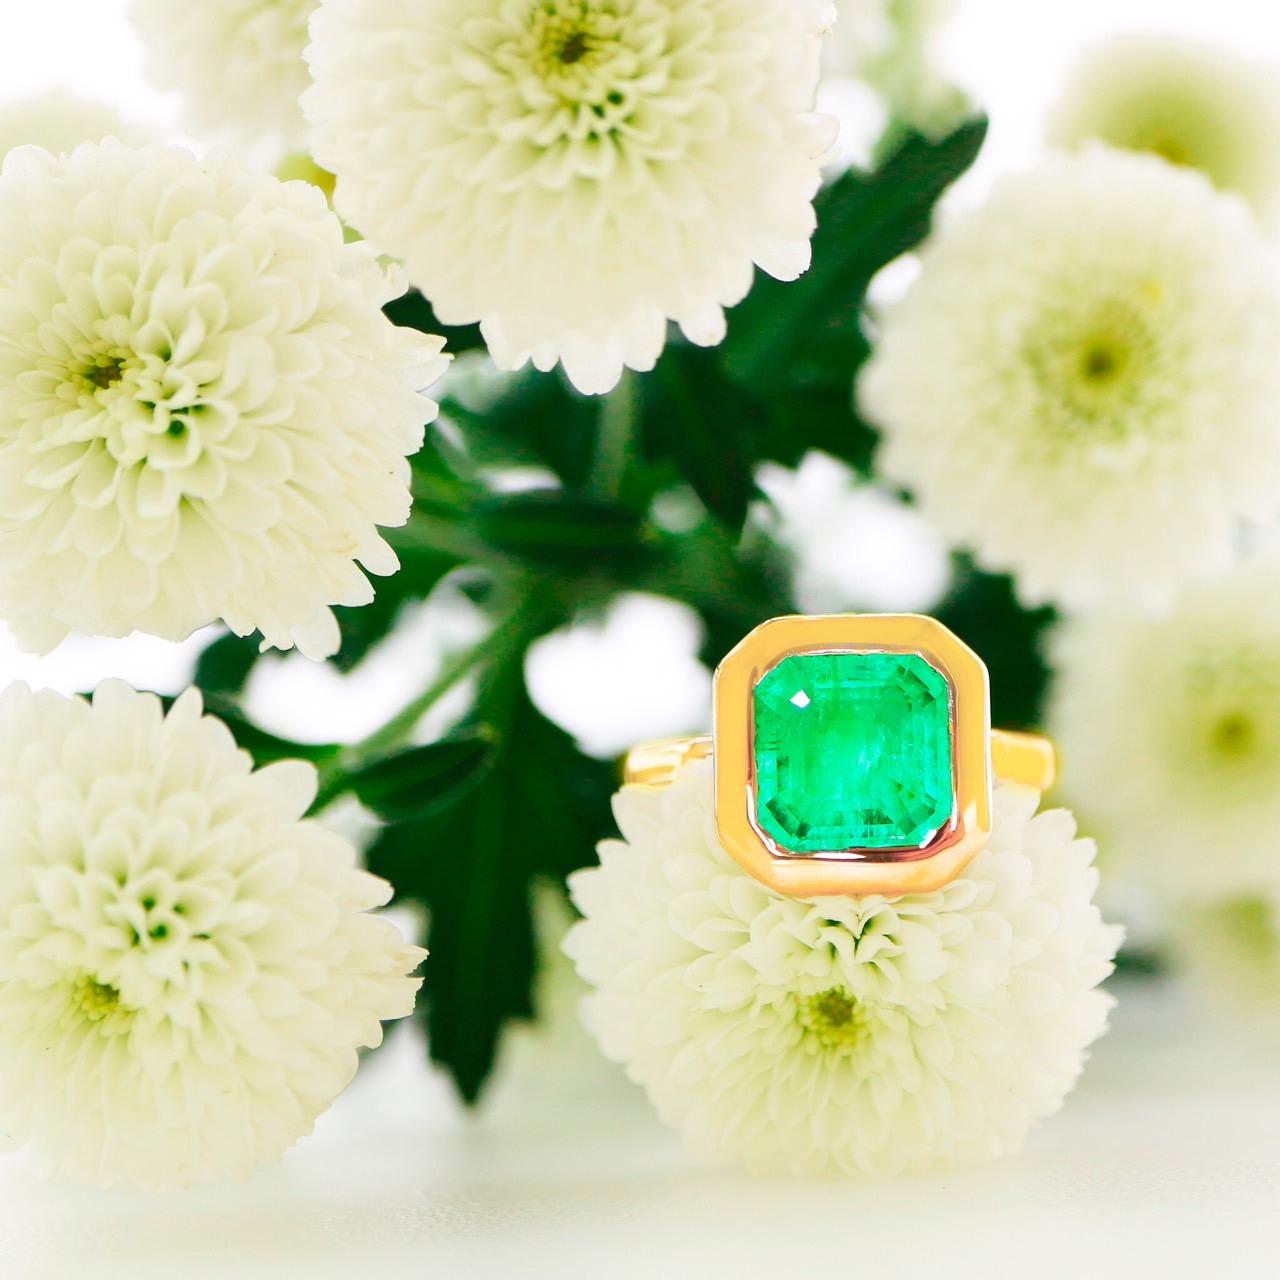 **IGI-Certified 18K Yellow Gold 2.50 Ct Natural Emerald Diamond Antique Art Deco Engagement Ring**
IGI-Certified natural Zambia green with great luster emerald as the center stone weighing 2.50 set on the 18-carat yellow gold bezel setting and